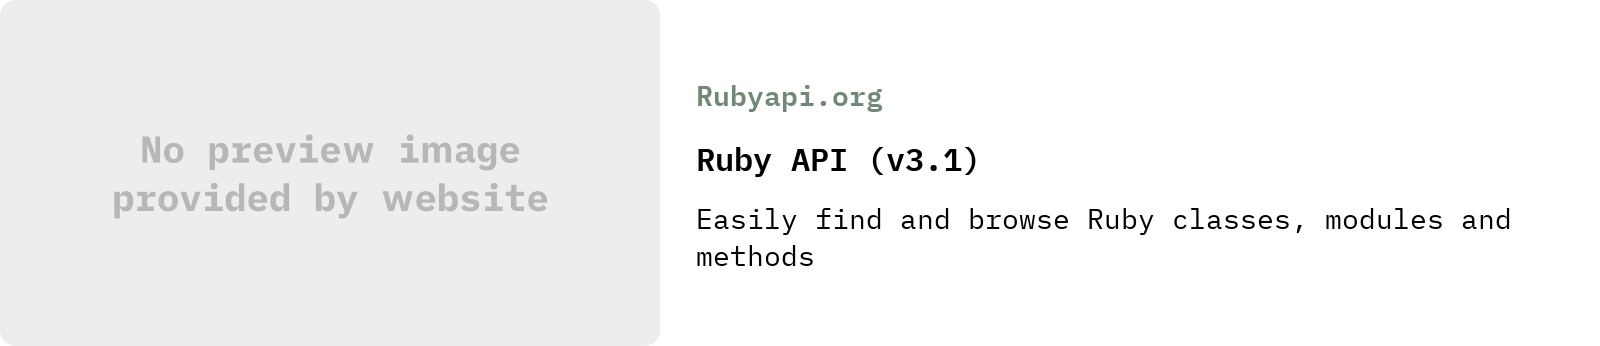 From Rubyapi.org: Ruby API (v3.1) | Easily find and browse Ruby classes, modules and methods